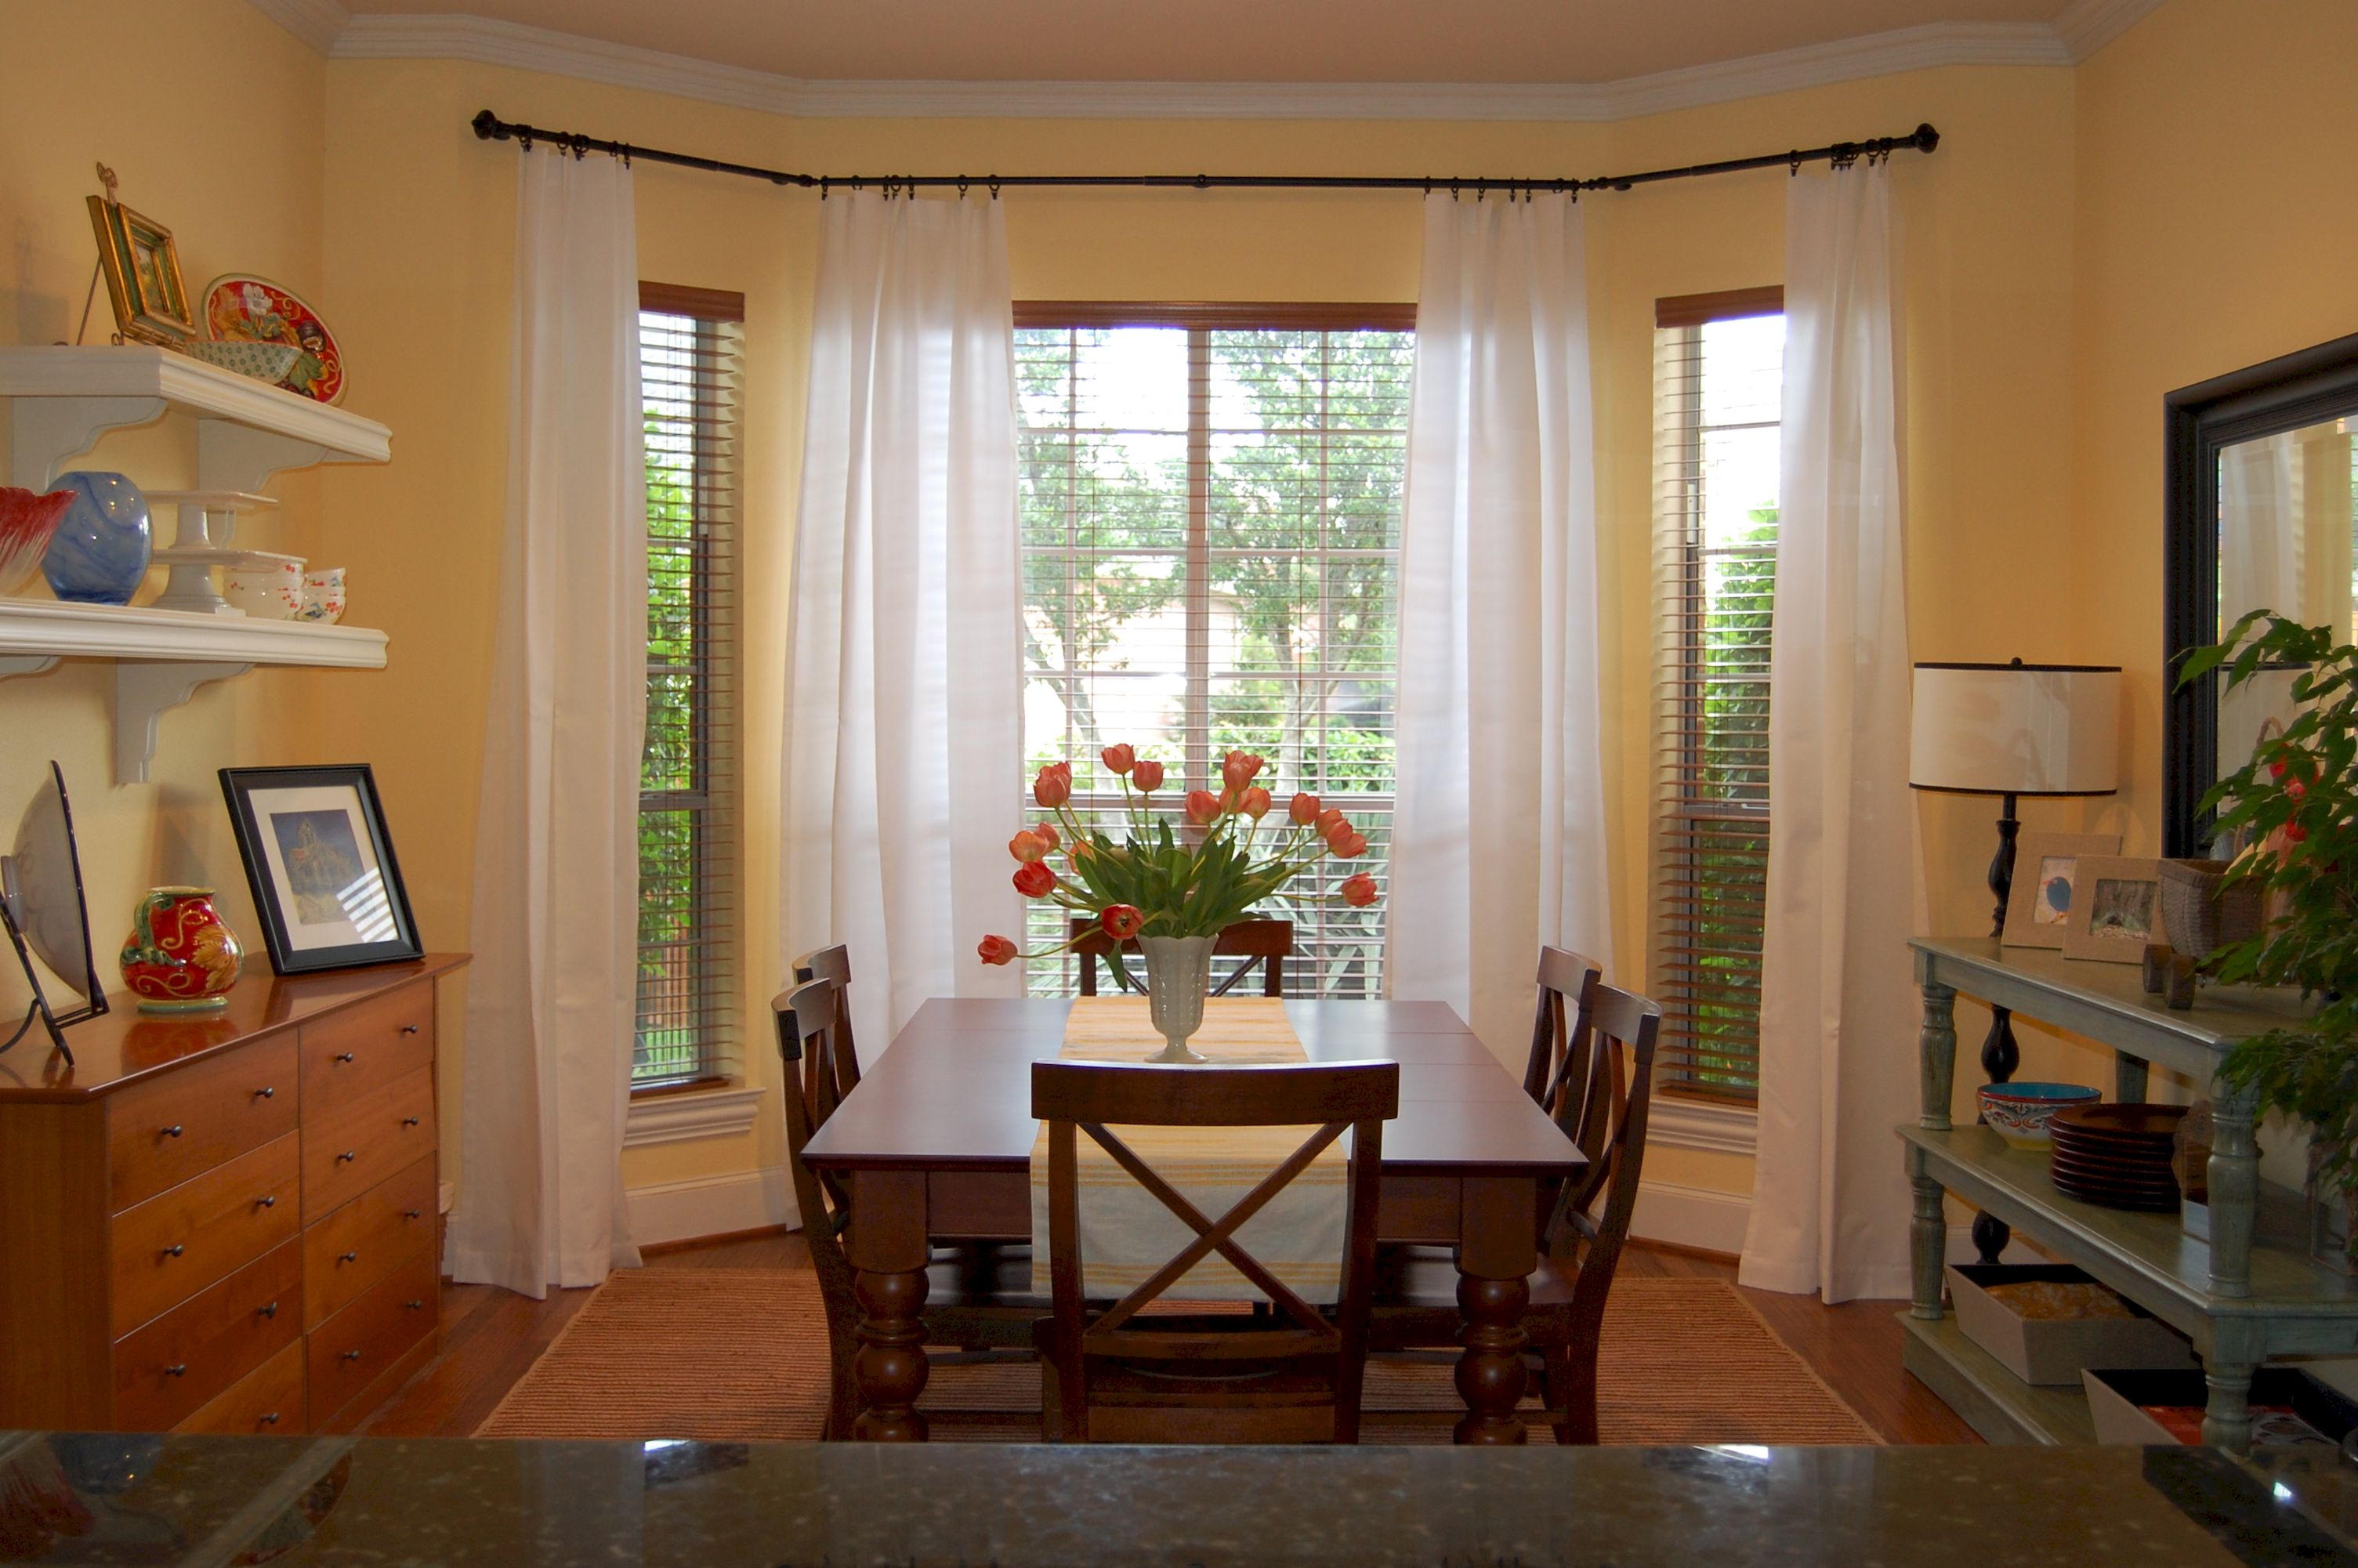 Window Treatments For Sliding Glass Doors In Kitchen photo - 3